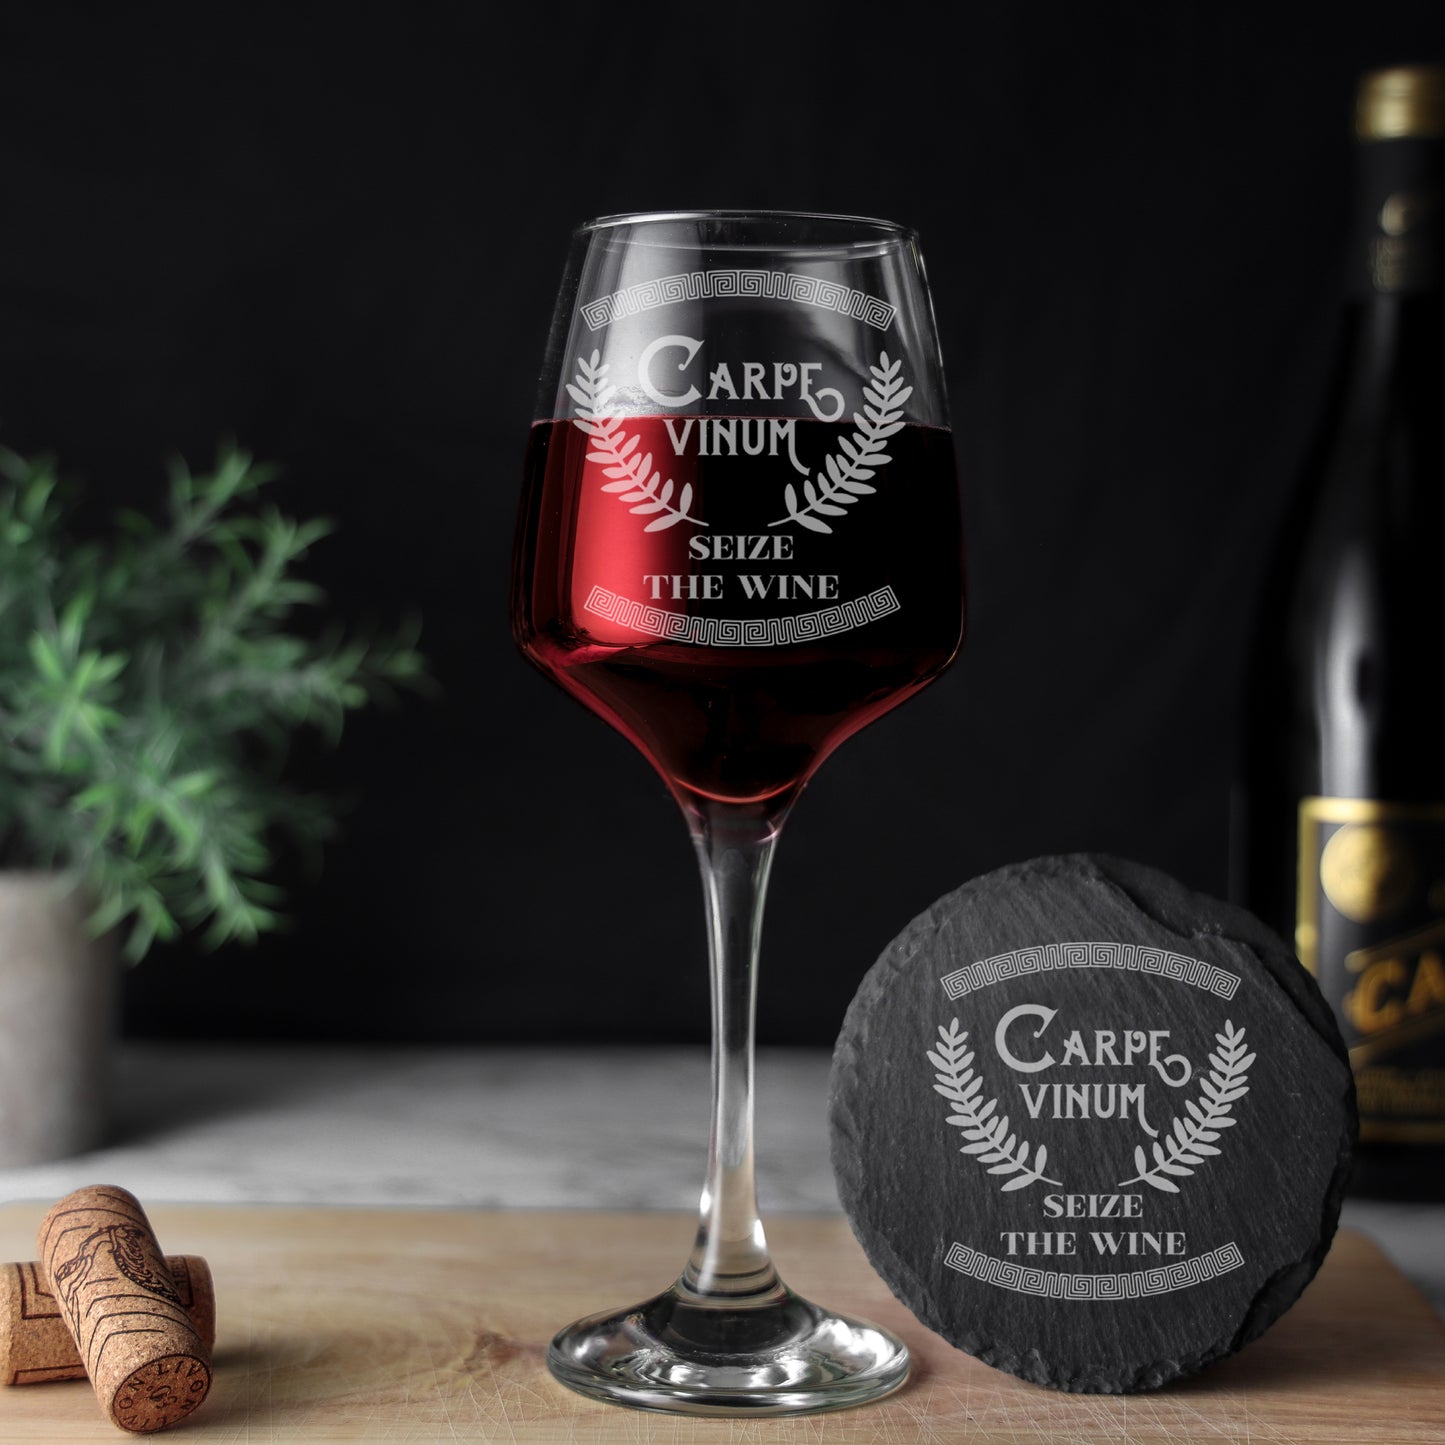 Funny Engraved "Carpe Vinum Seize The Wine" Novelty Wine Glass and/or Coaster Set  - Always Looking Good - Glass & Rounder Coaster  